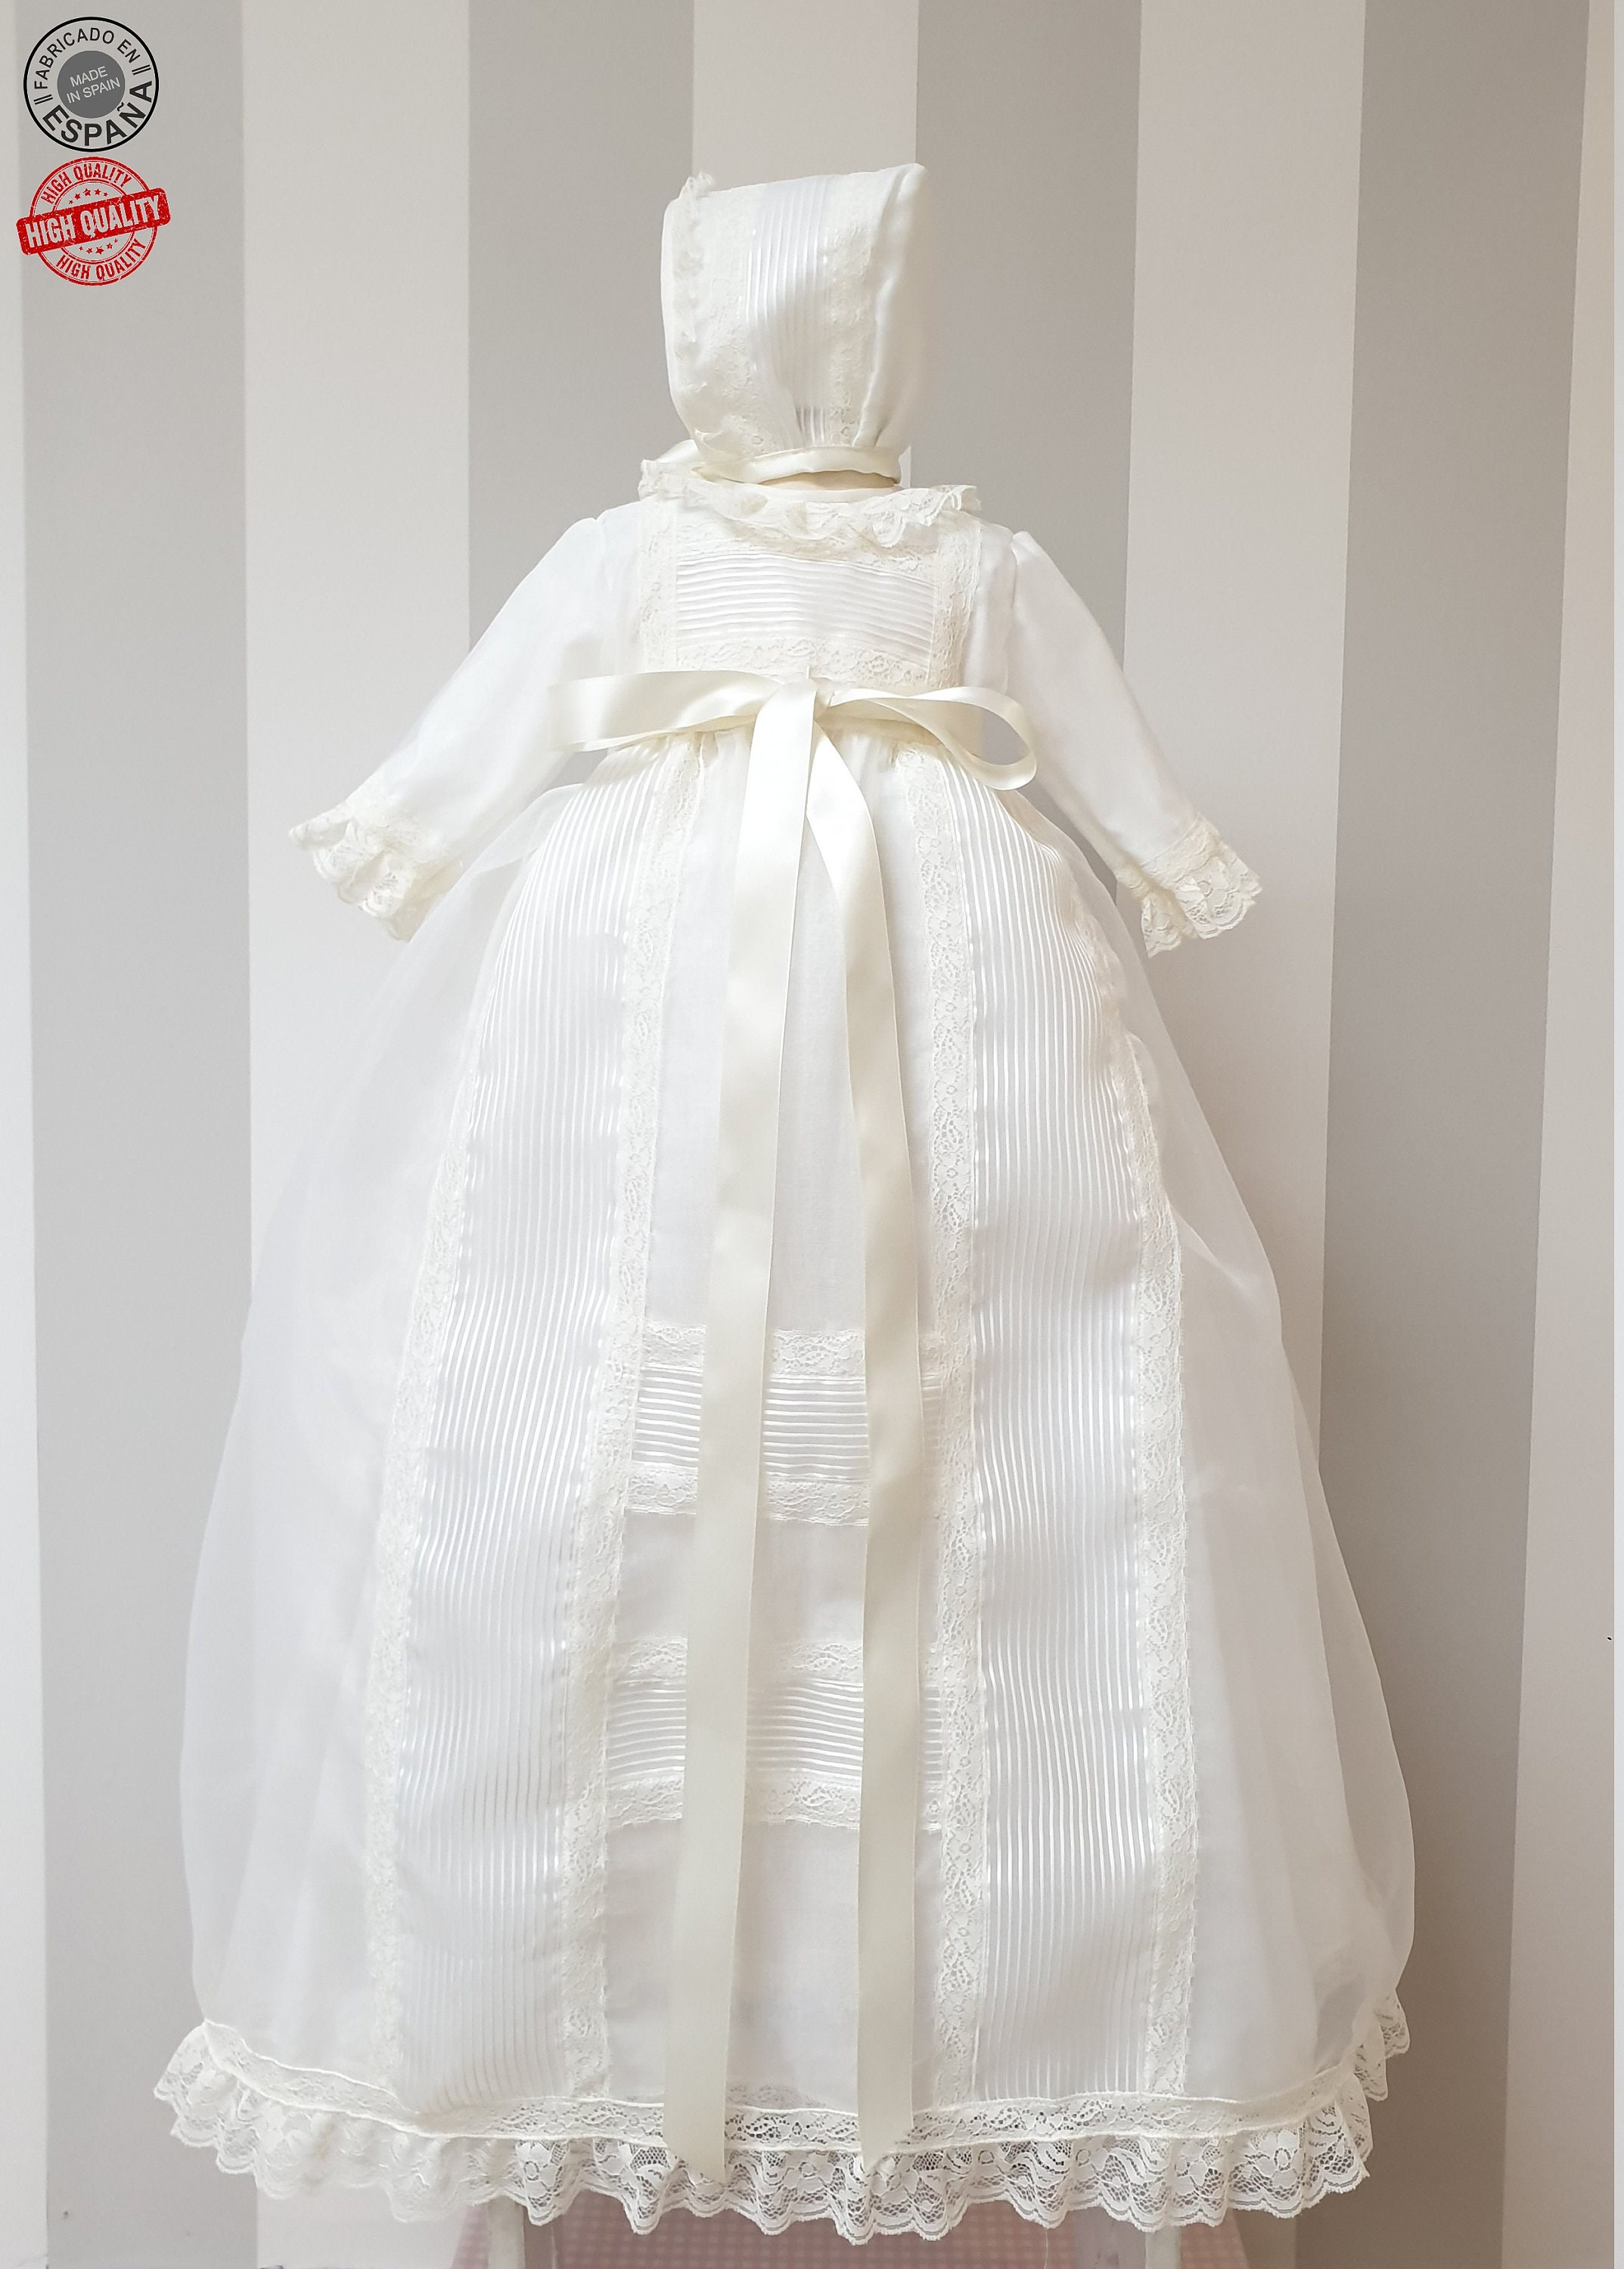 Matching bonnet included Classic baby christening dress made in Spain with matching hat Baby Baptism gown made in ivory organza and lace Clothing Unisex Kids Clothing Unisex Baby Clothing Clothing Sets 